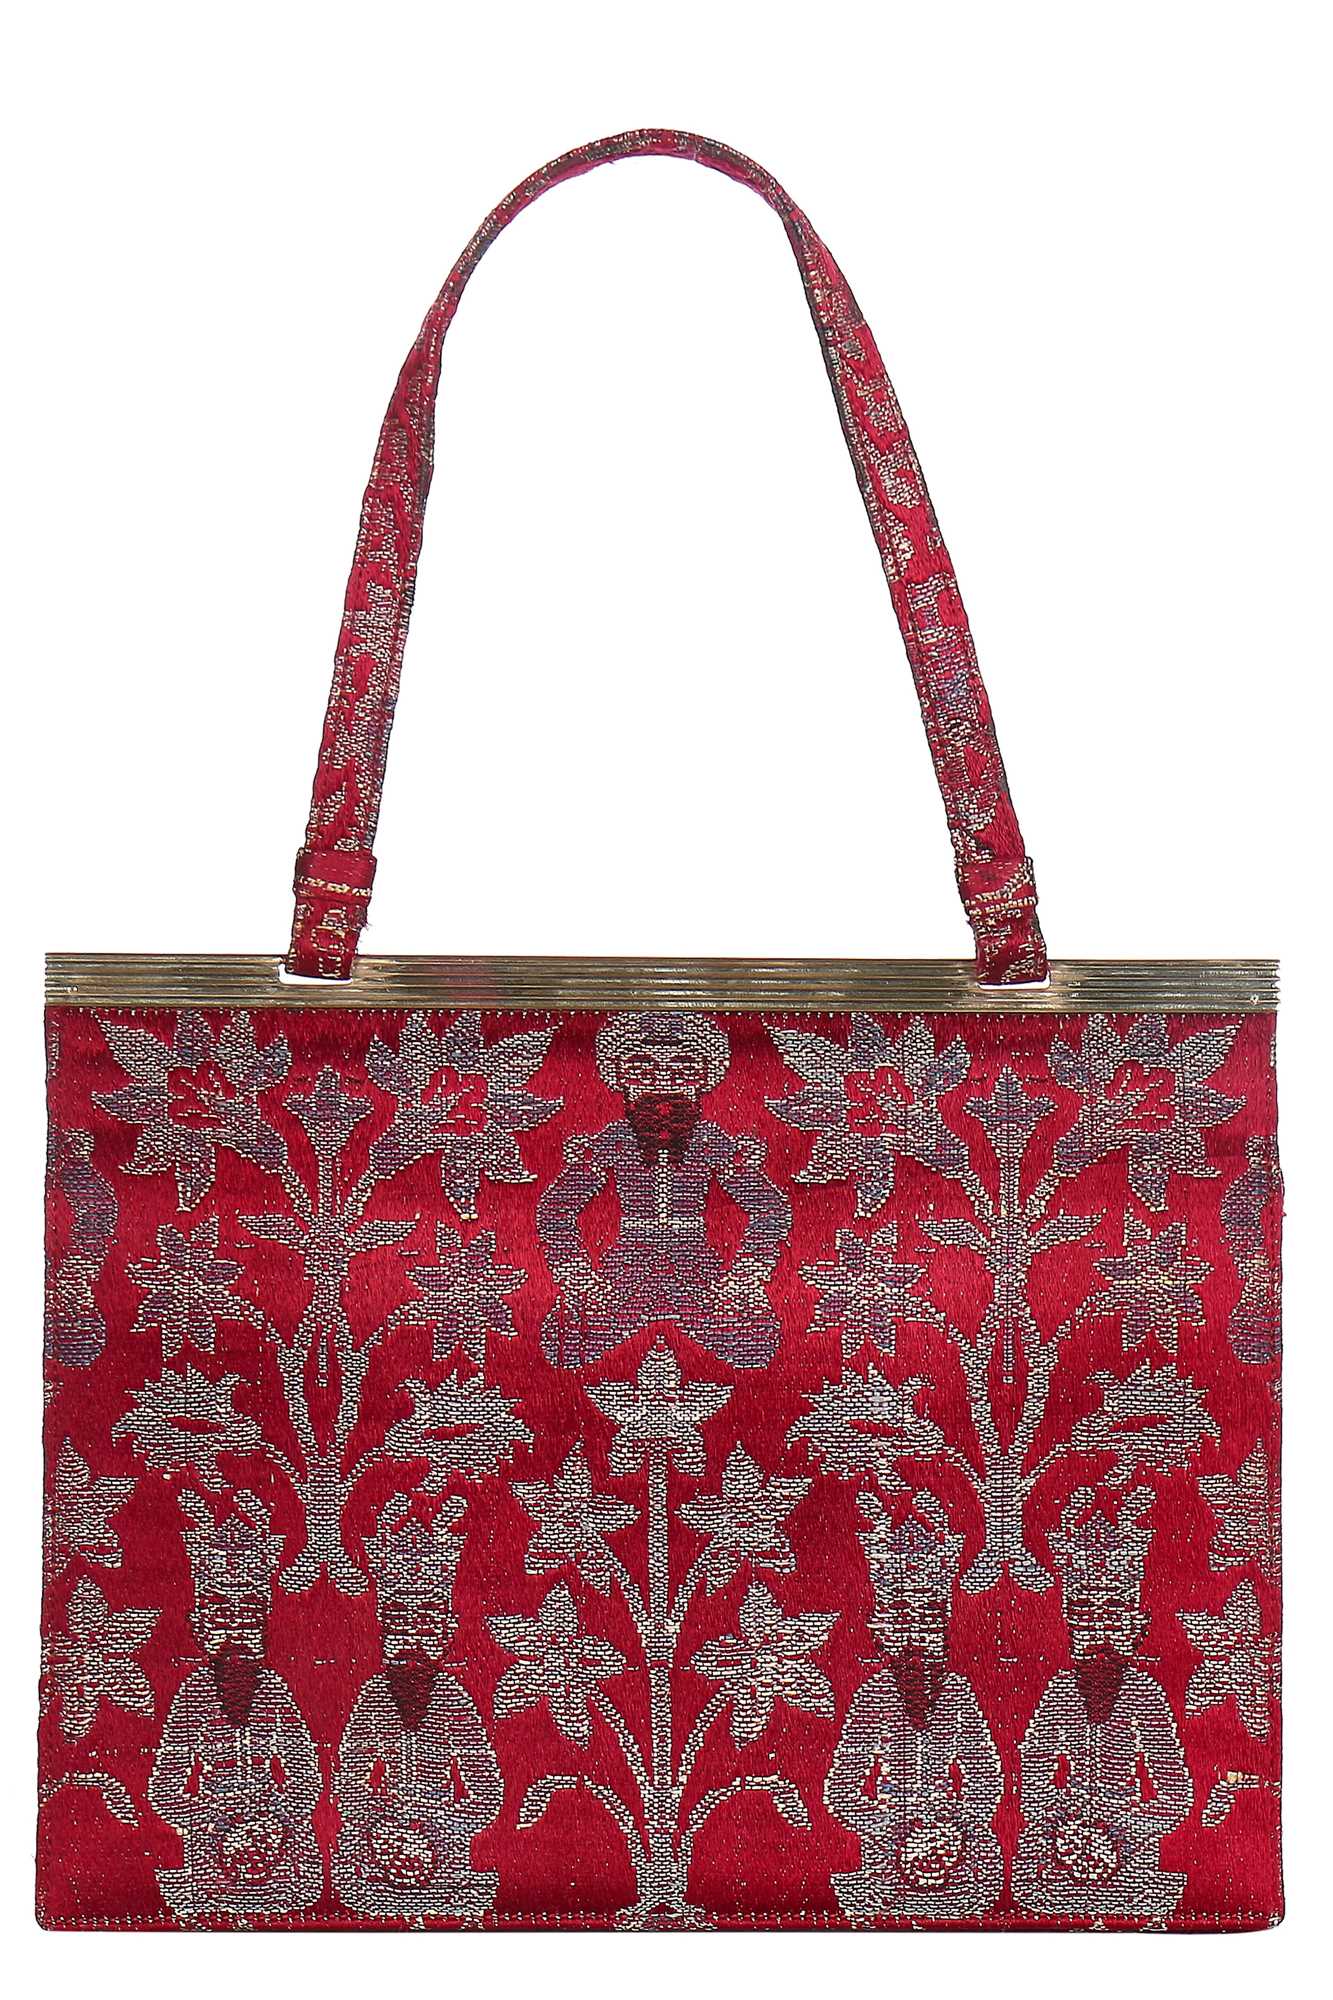 Lot 11 - A Cartier evening bag of Persian-style brocaded silk with 9ct gold frame, 1972